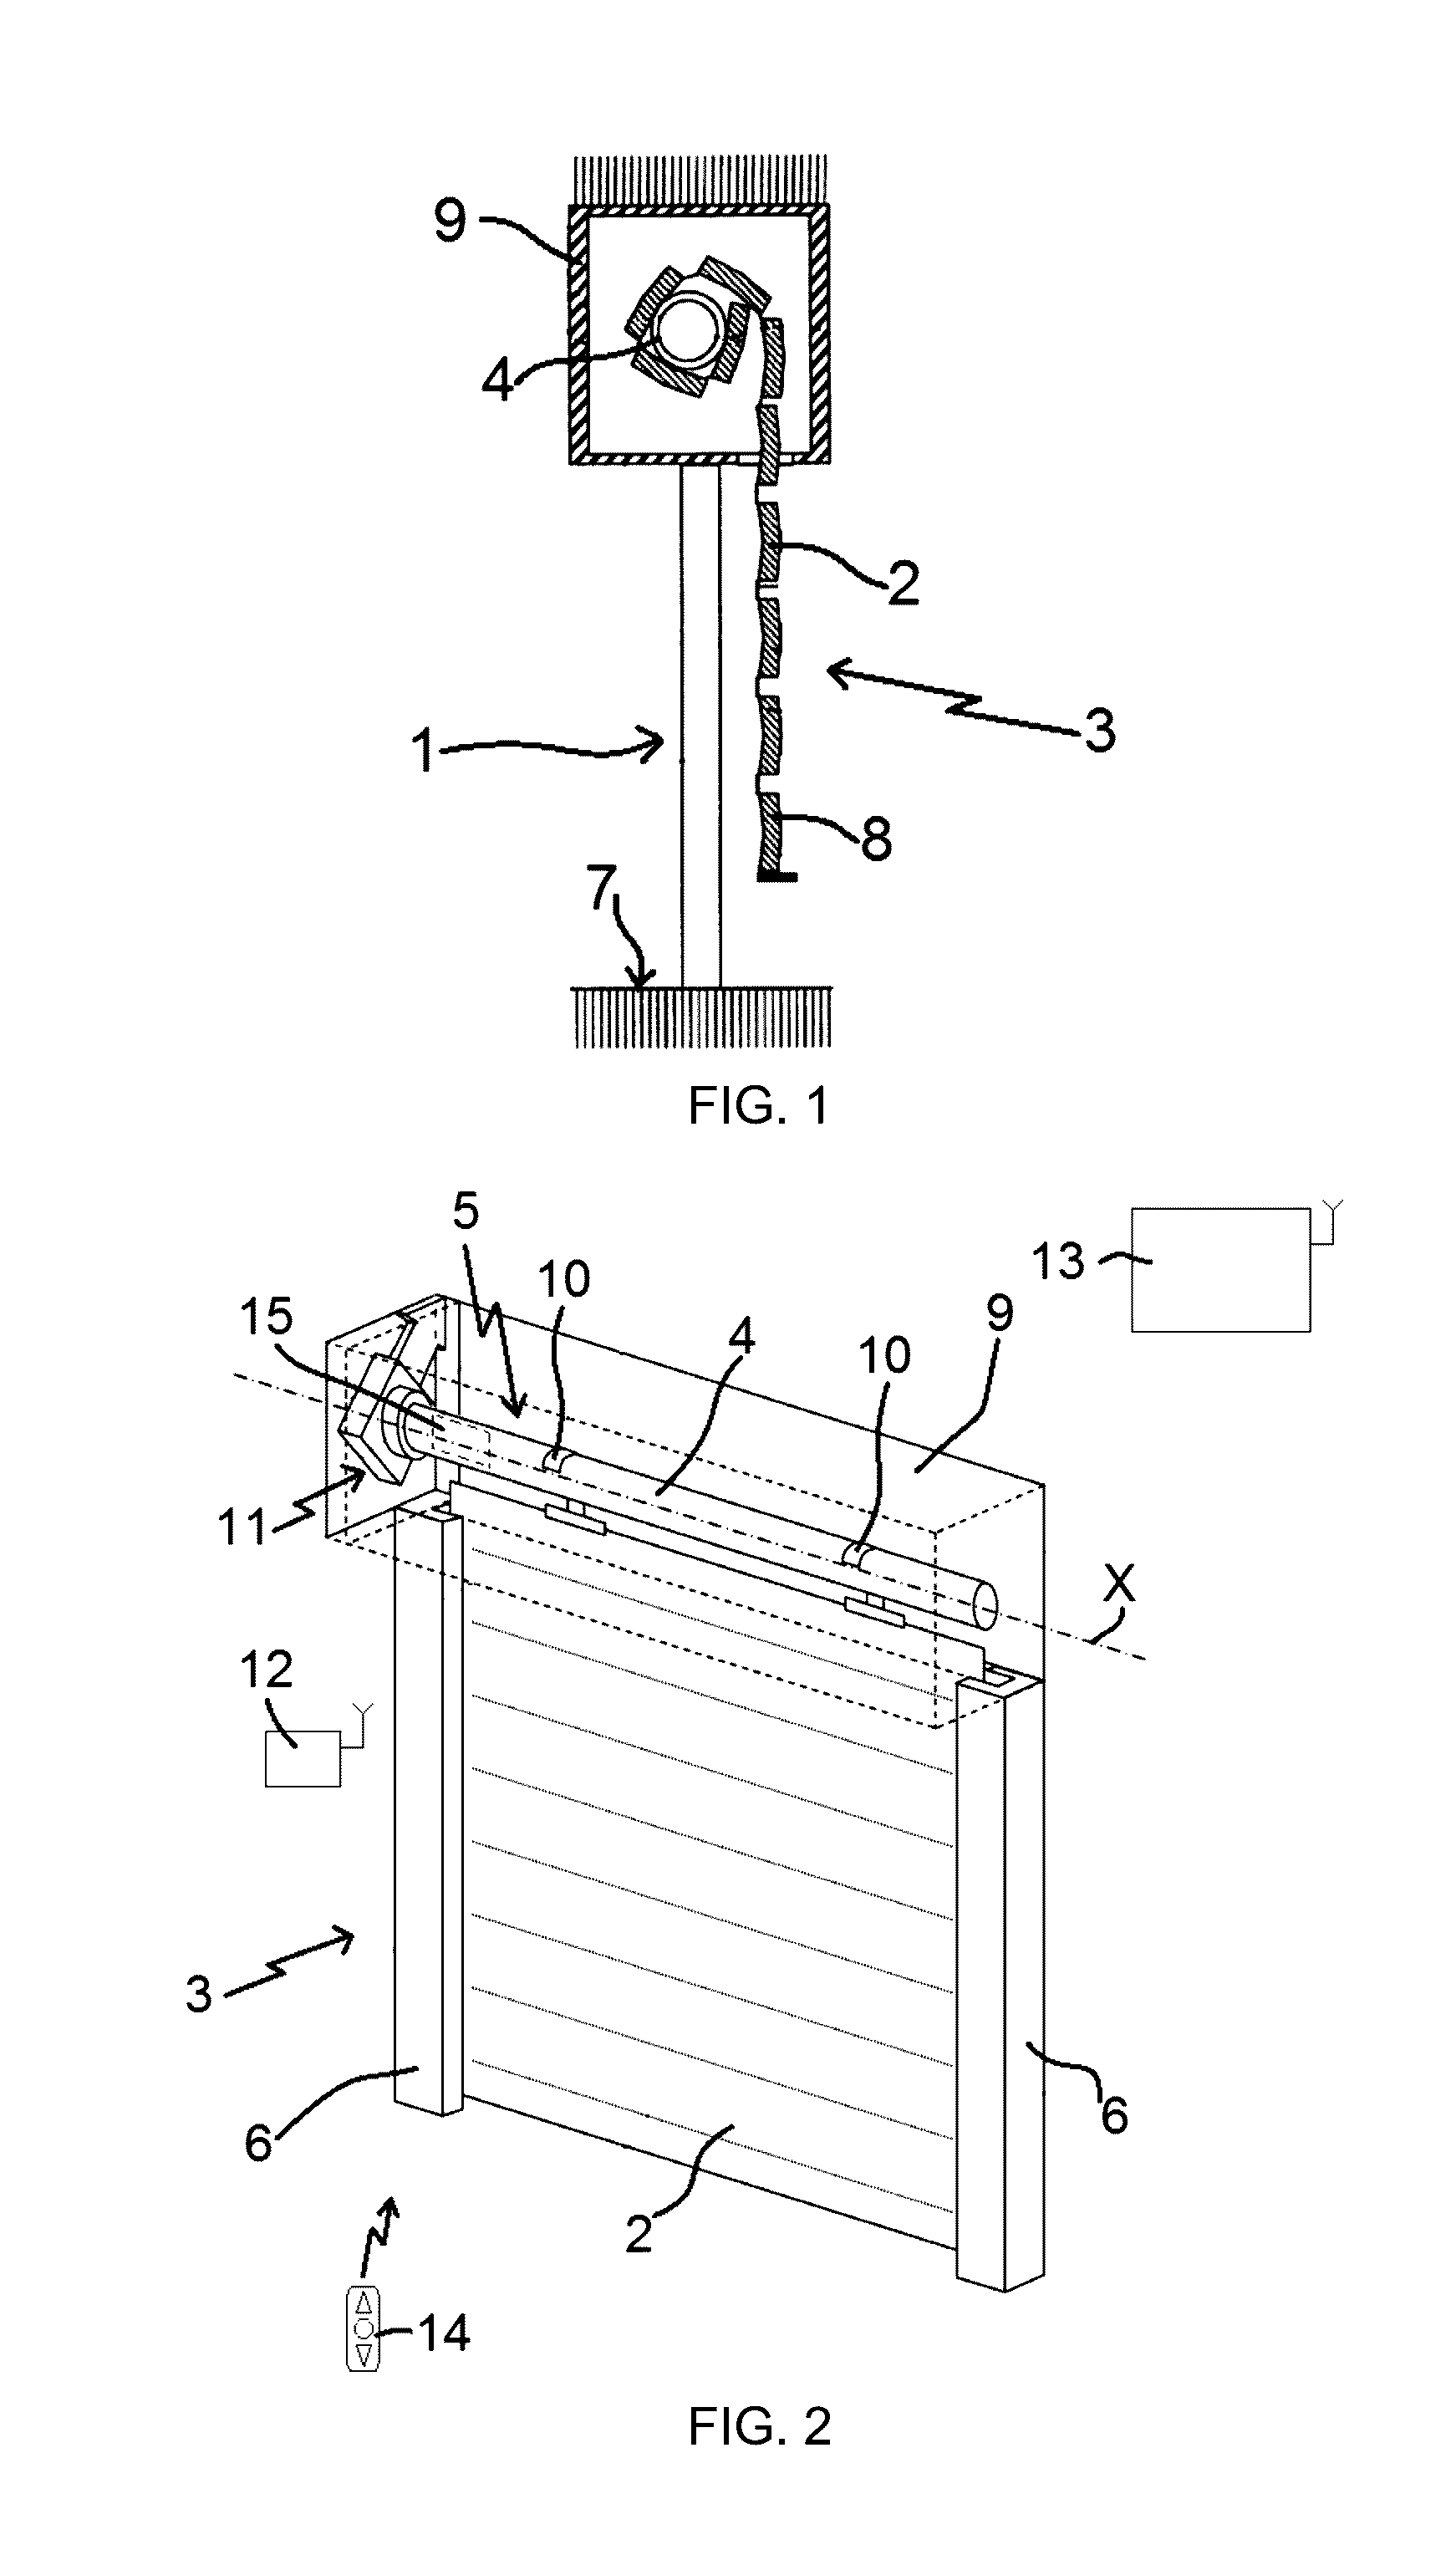 Operating control method of a motorized driving device of a home automation installation